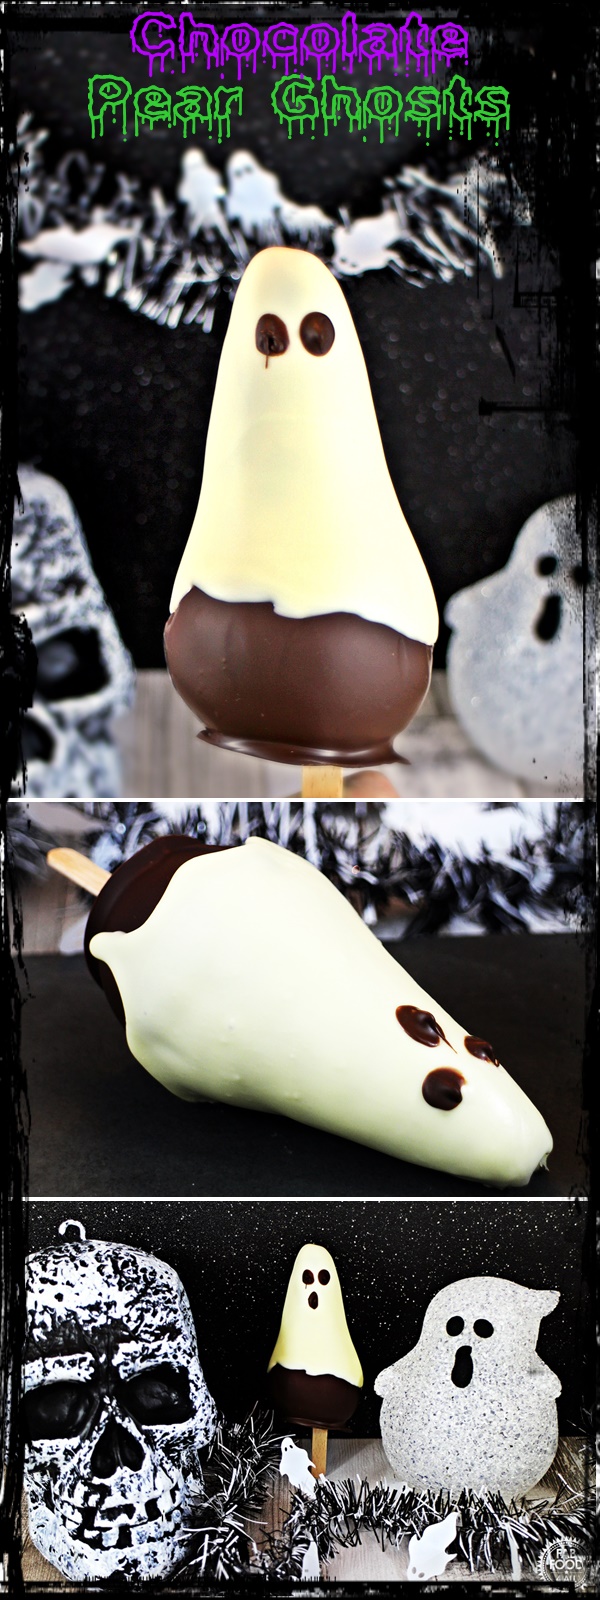 Chocolate Pear Ghosts - Fab Food 4 All